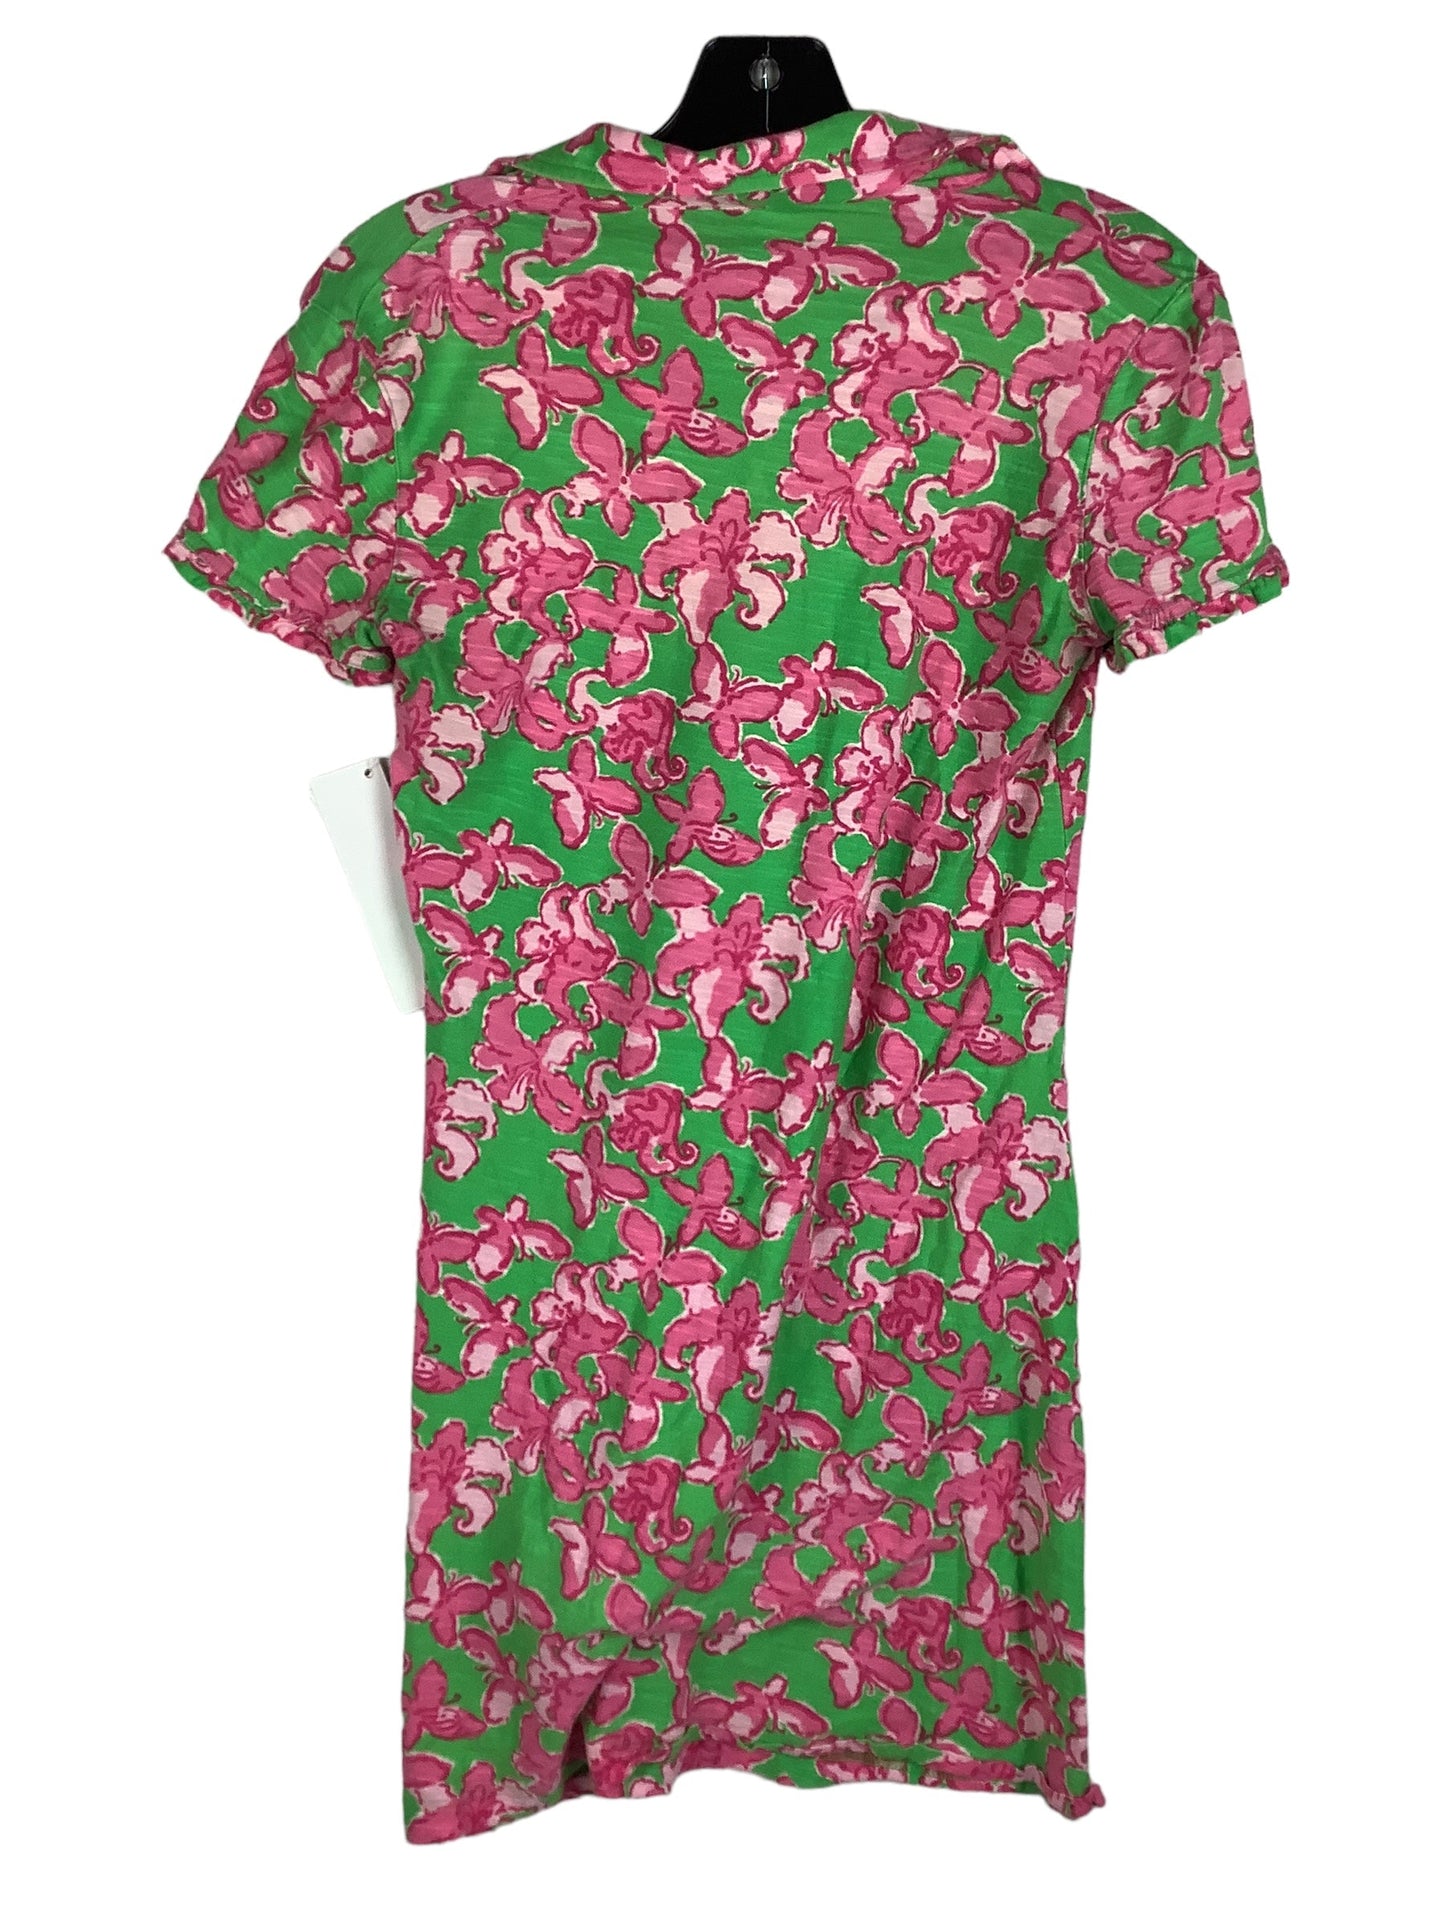 Dress Designer By Lilly Pulitzer  Size: Xs